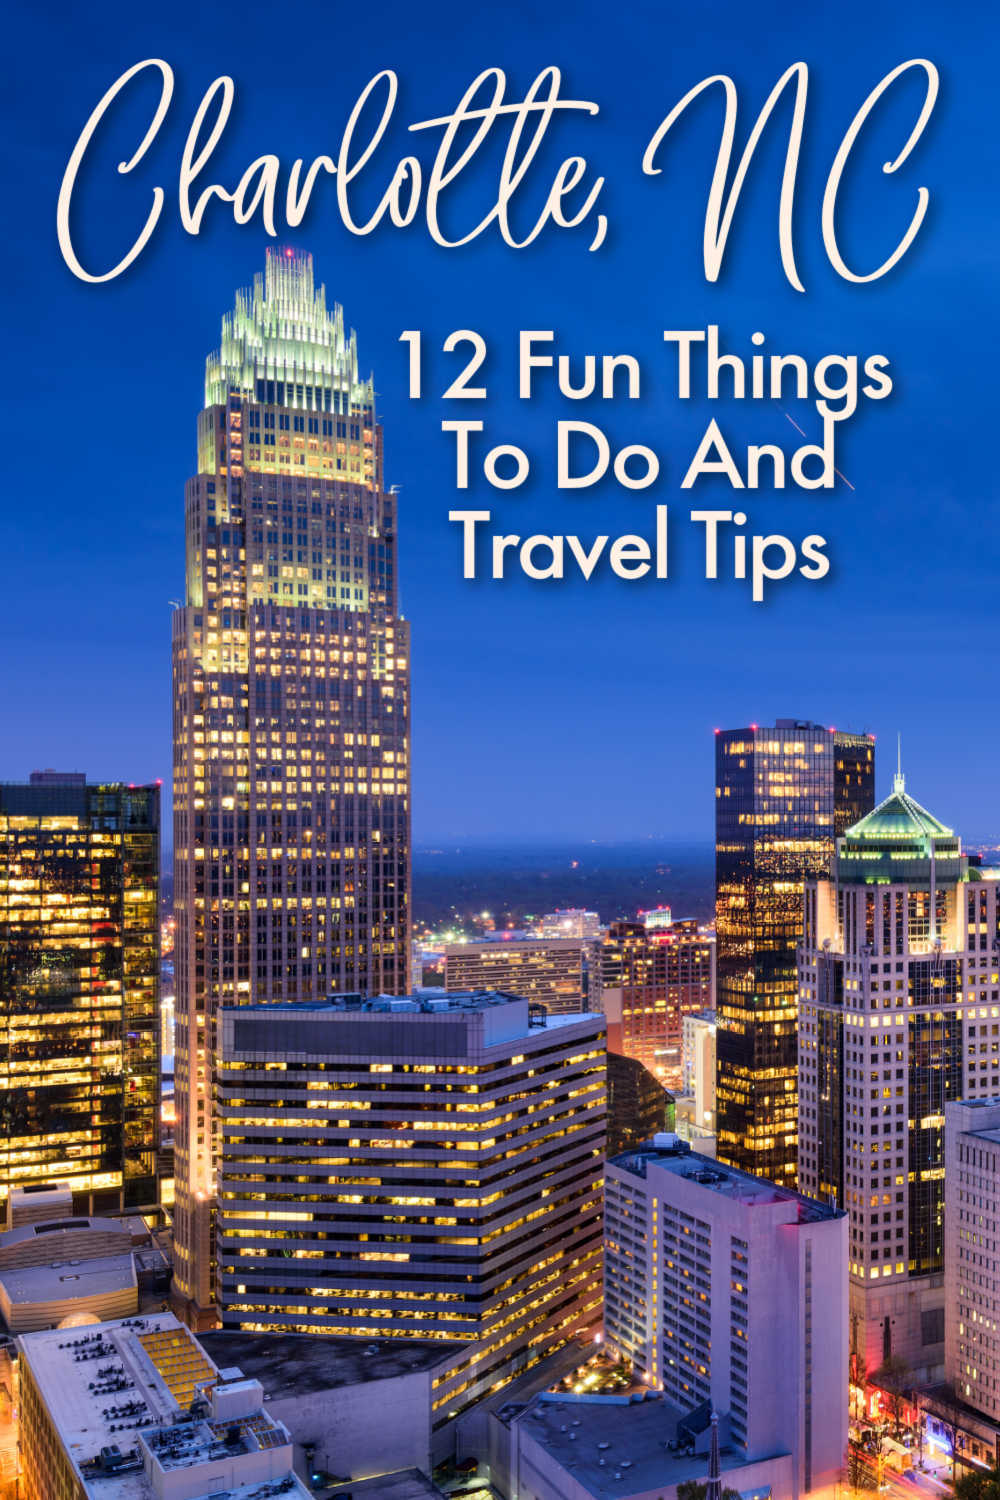 Guide to the best things to do in Charlotte, North Caroline, USA. We listed Charlotte attractions and places to visit, from outdoor fun to museums, tours and nightlife. Everything you need to know to travel to Charlotte is here.Charlotte NC | Charlotte restaurants | Charlotte things to do | Charlotte places to visit |